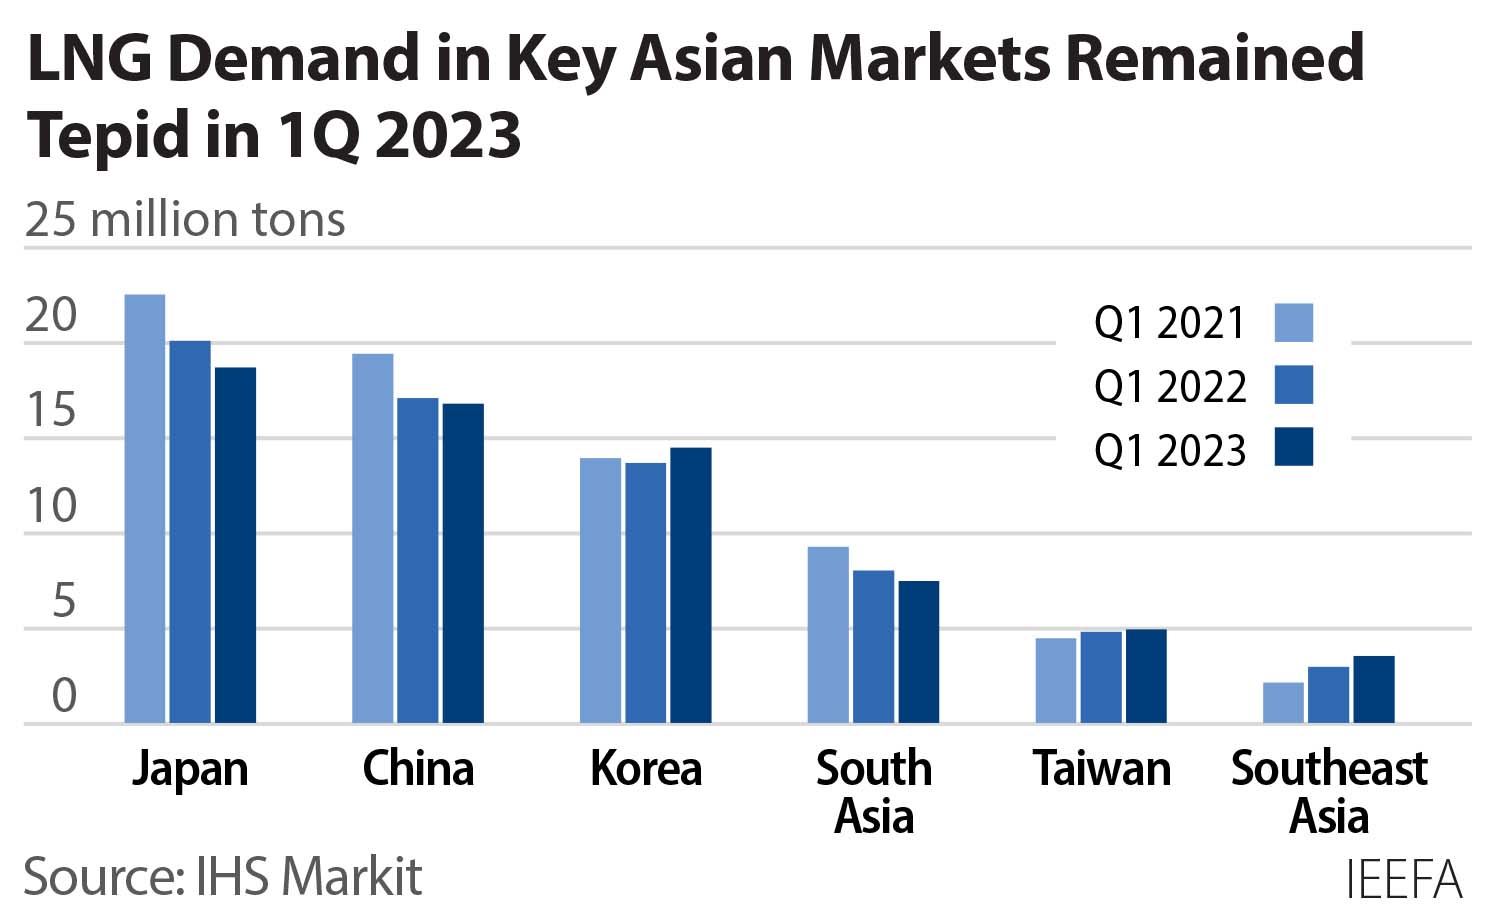 LNG demand in key Asian markets remained tepid in 1Q 2023